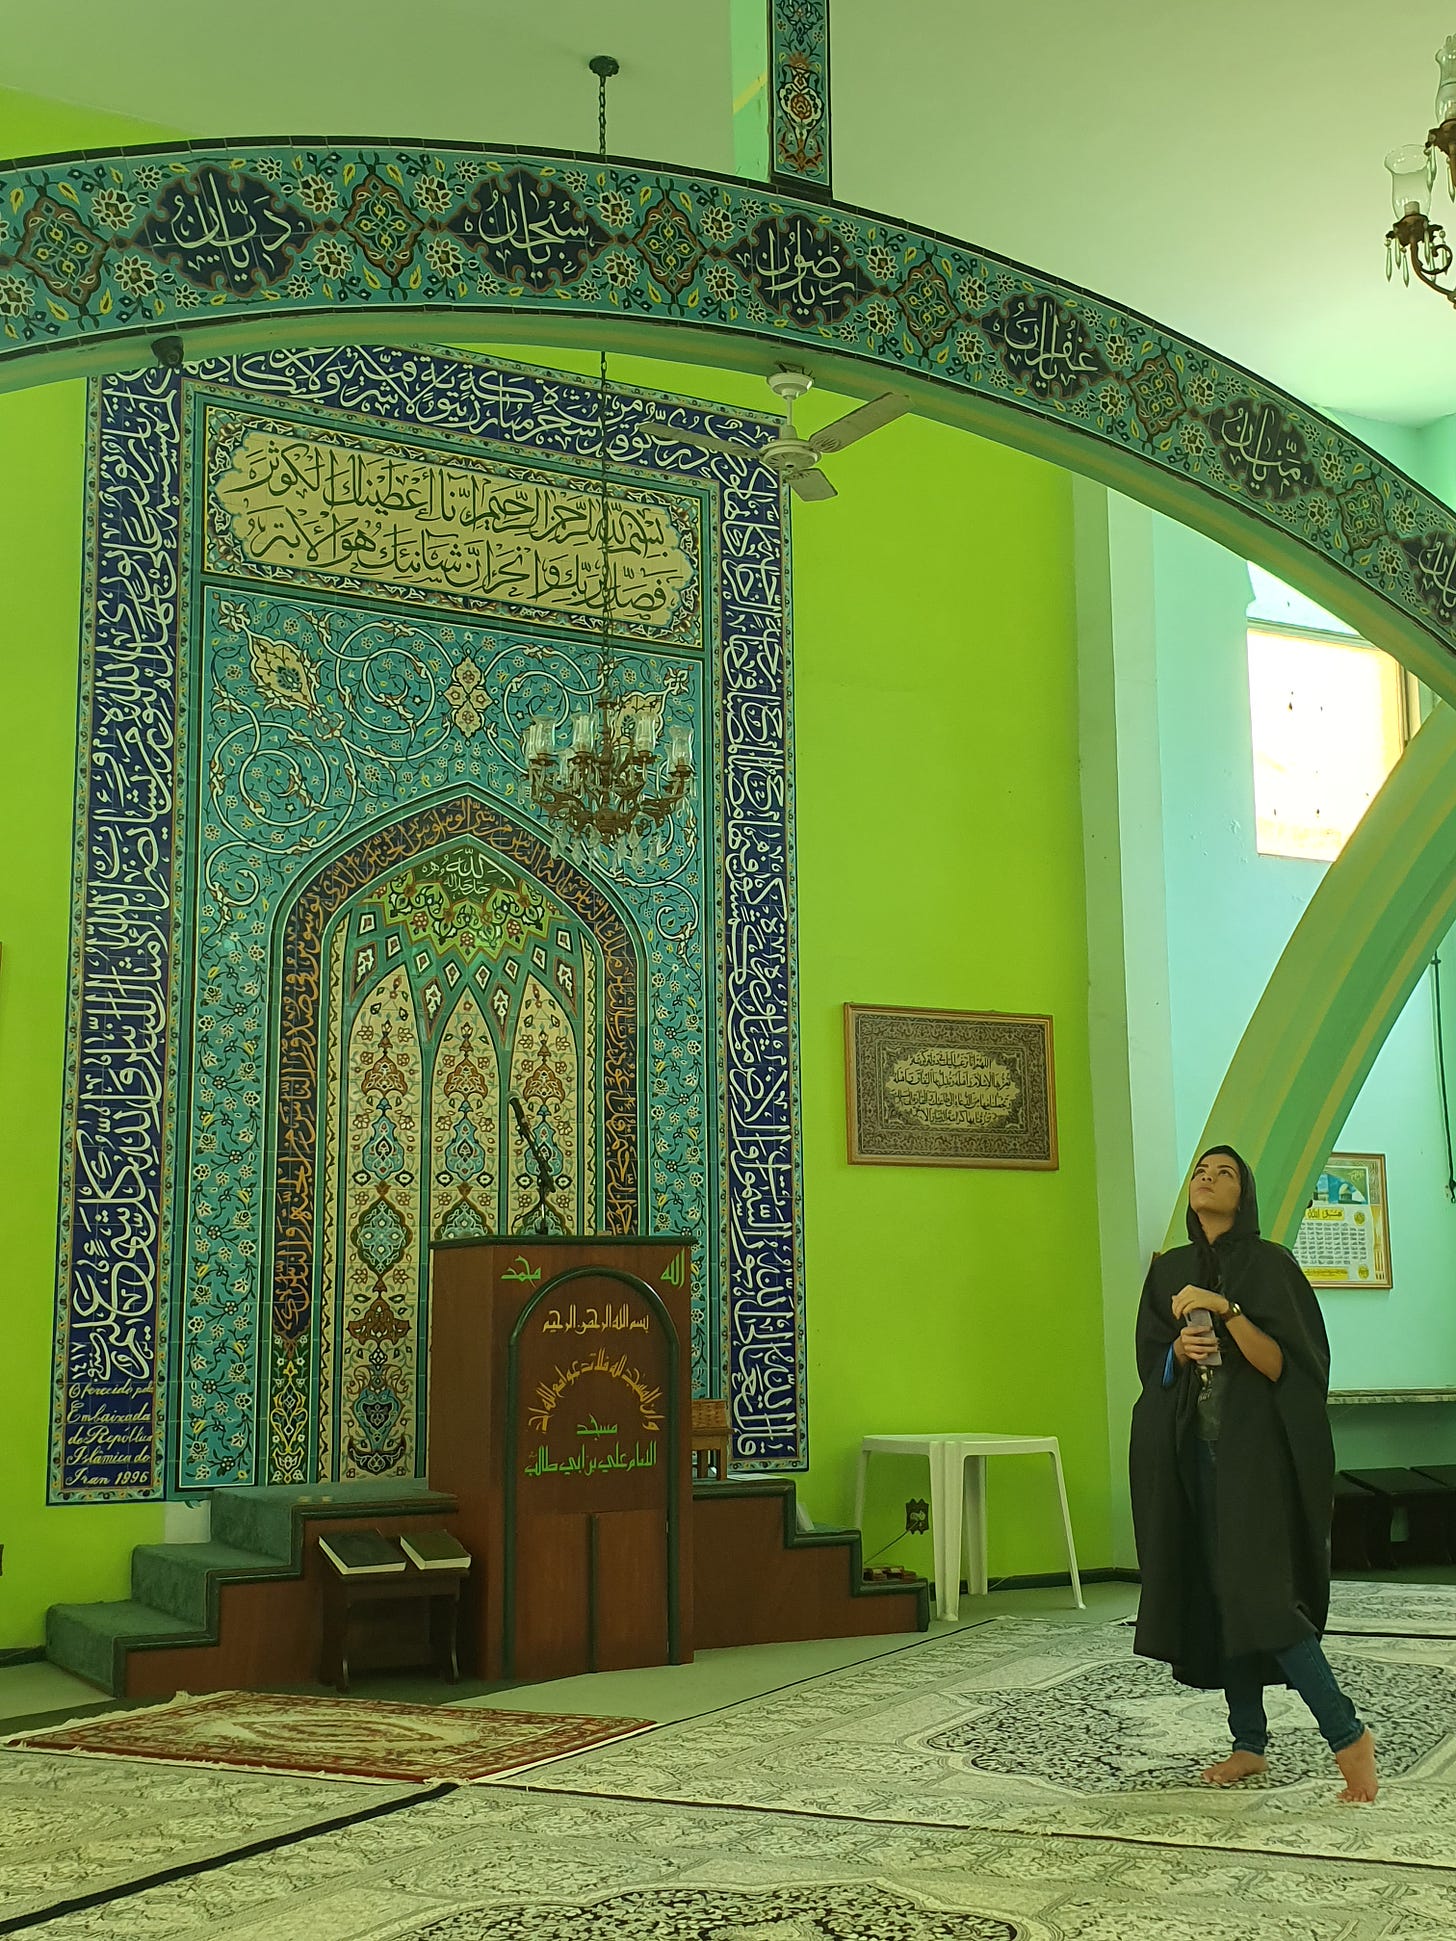 A young woman in dark abaya gazes upwards in front of the mimbar in a mosque with lime green walls and elaborate decor with Arabic script in blue, turquoise, cream, and gold. Small chandeliers hang from the high ceiling. Sunlight gently suffuses the room so that the colors glow. 